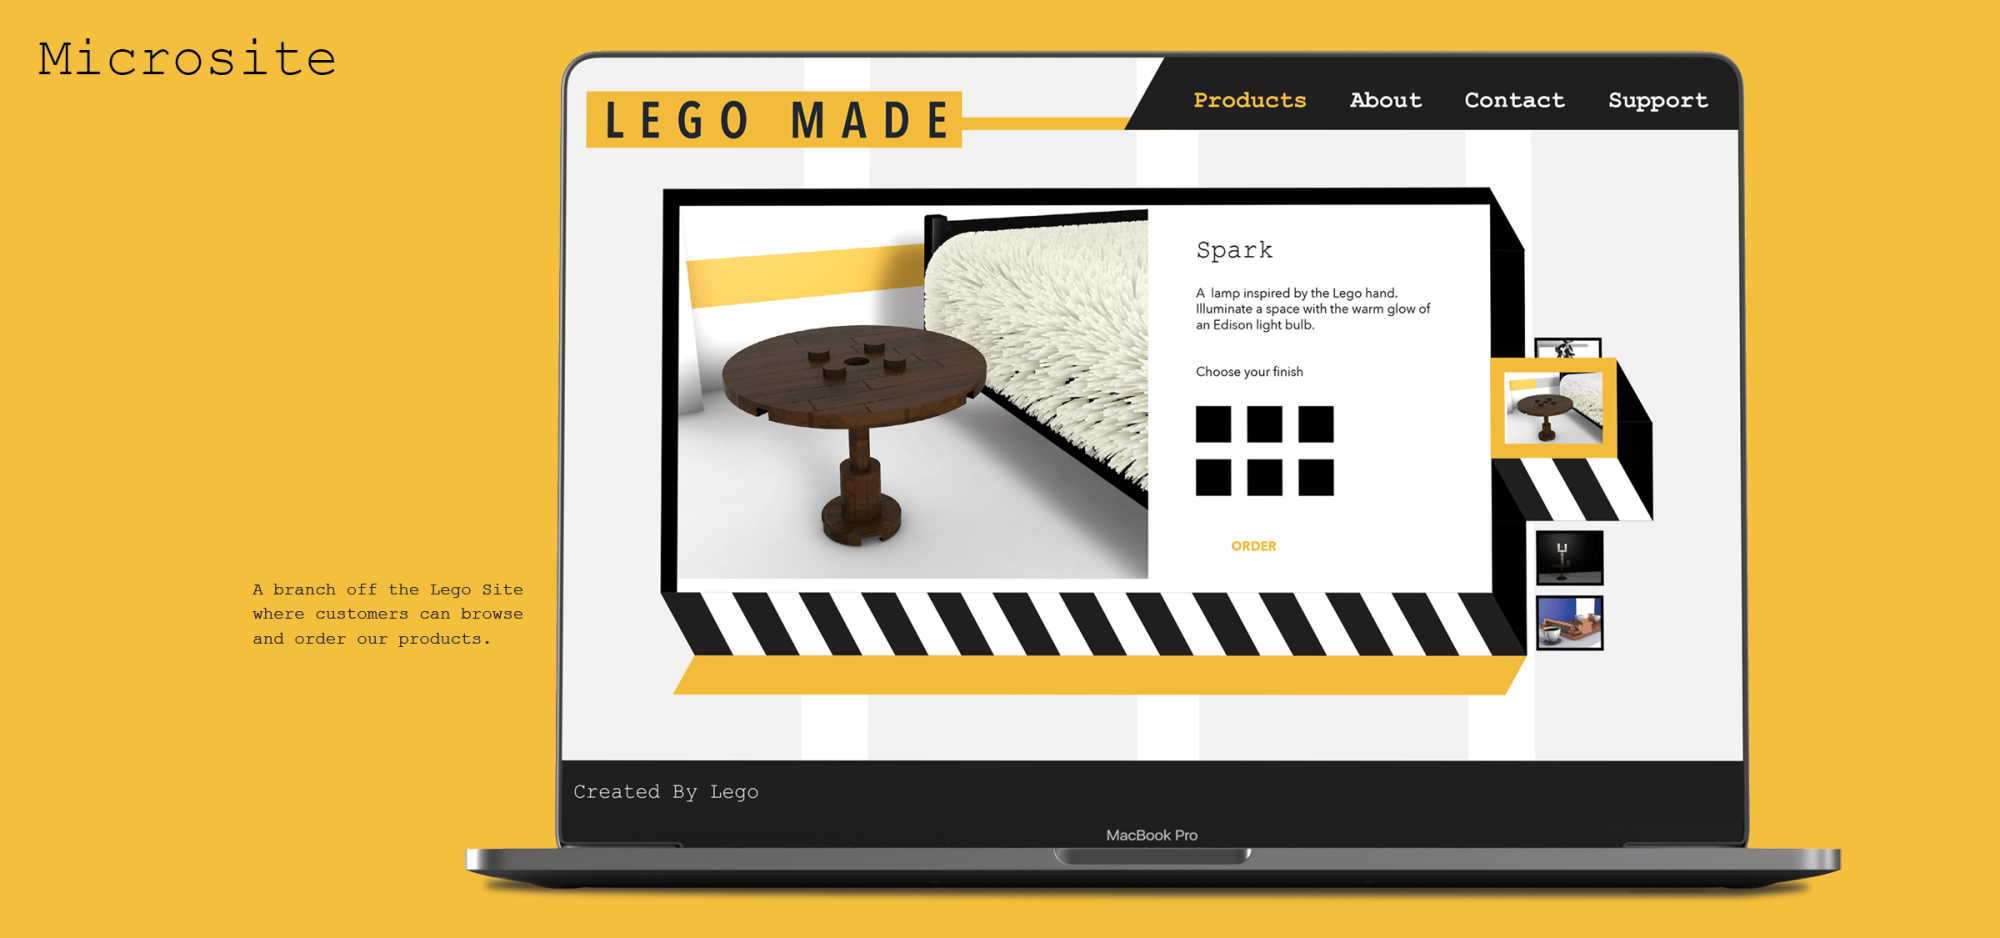 1-Legomade-microsite.png